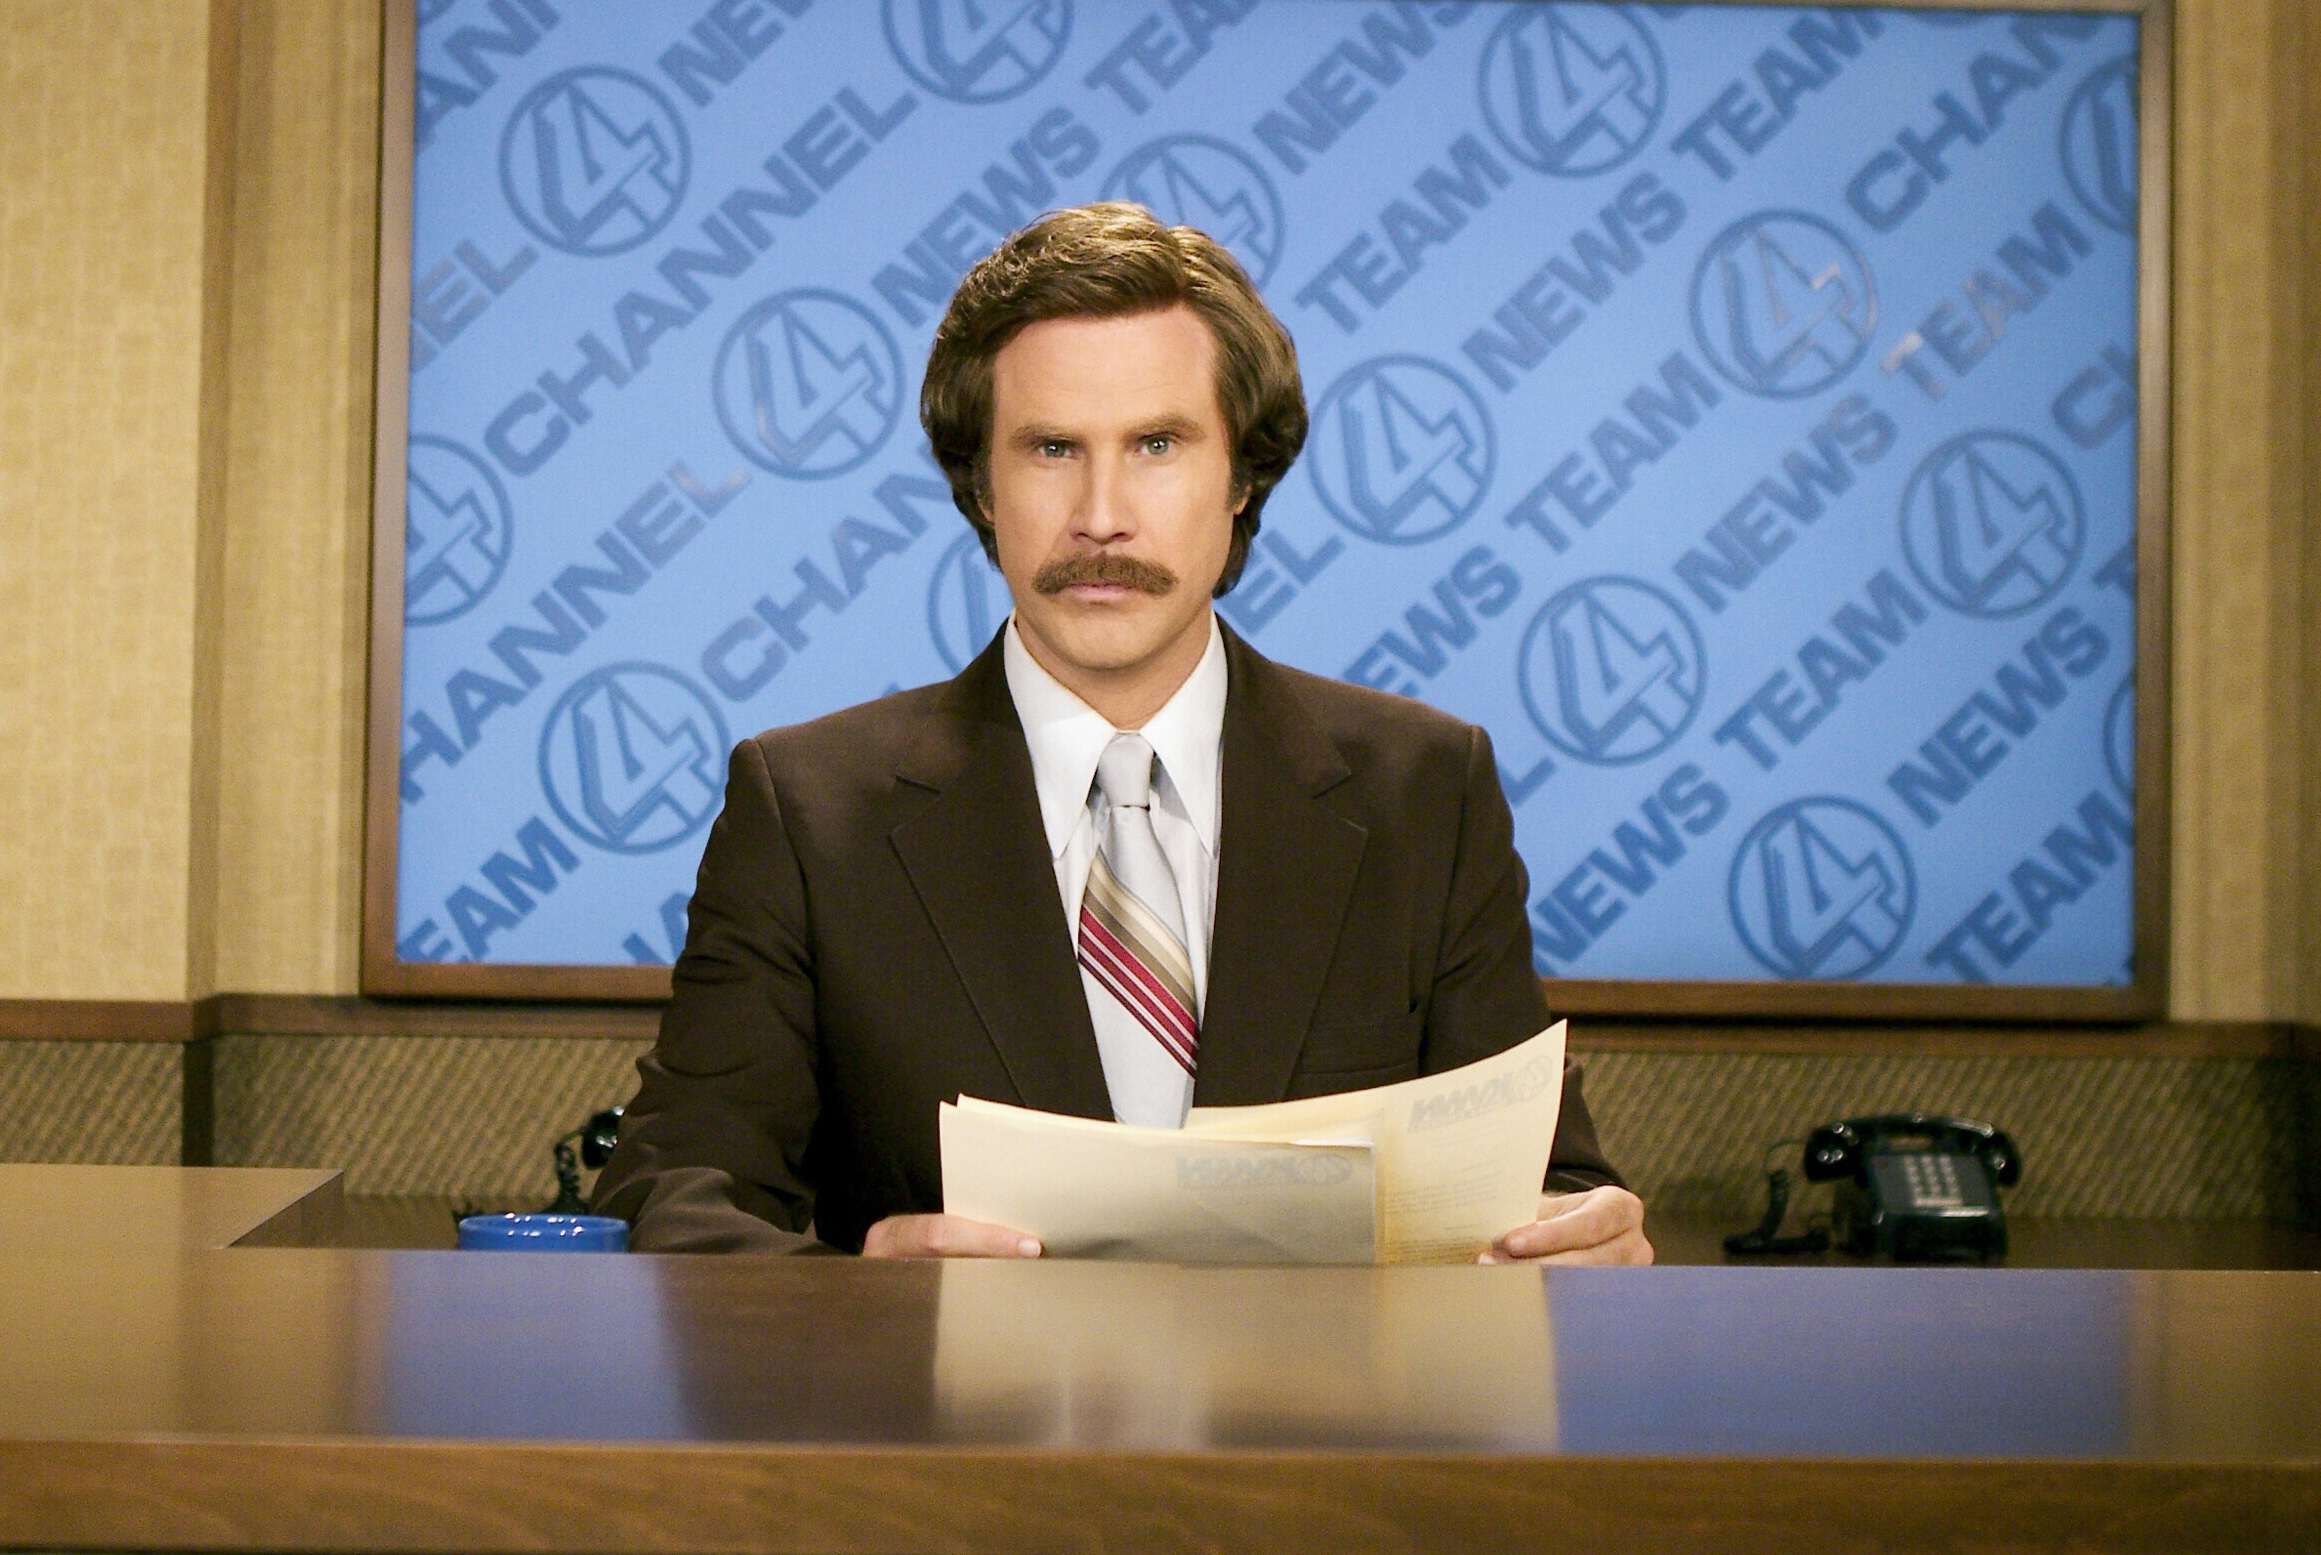 Anchorman The Legend of Ron Burgundy, Will Ferrell